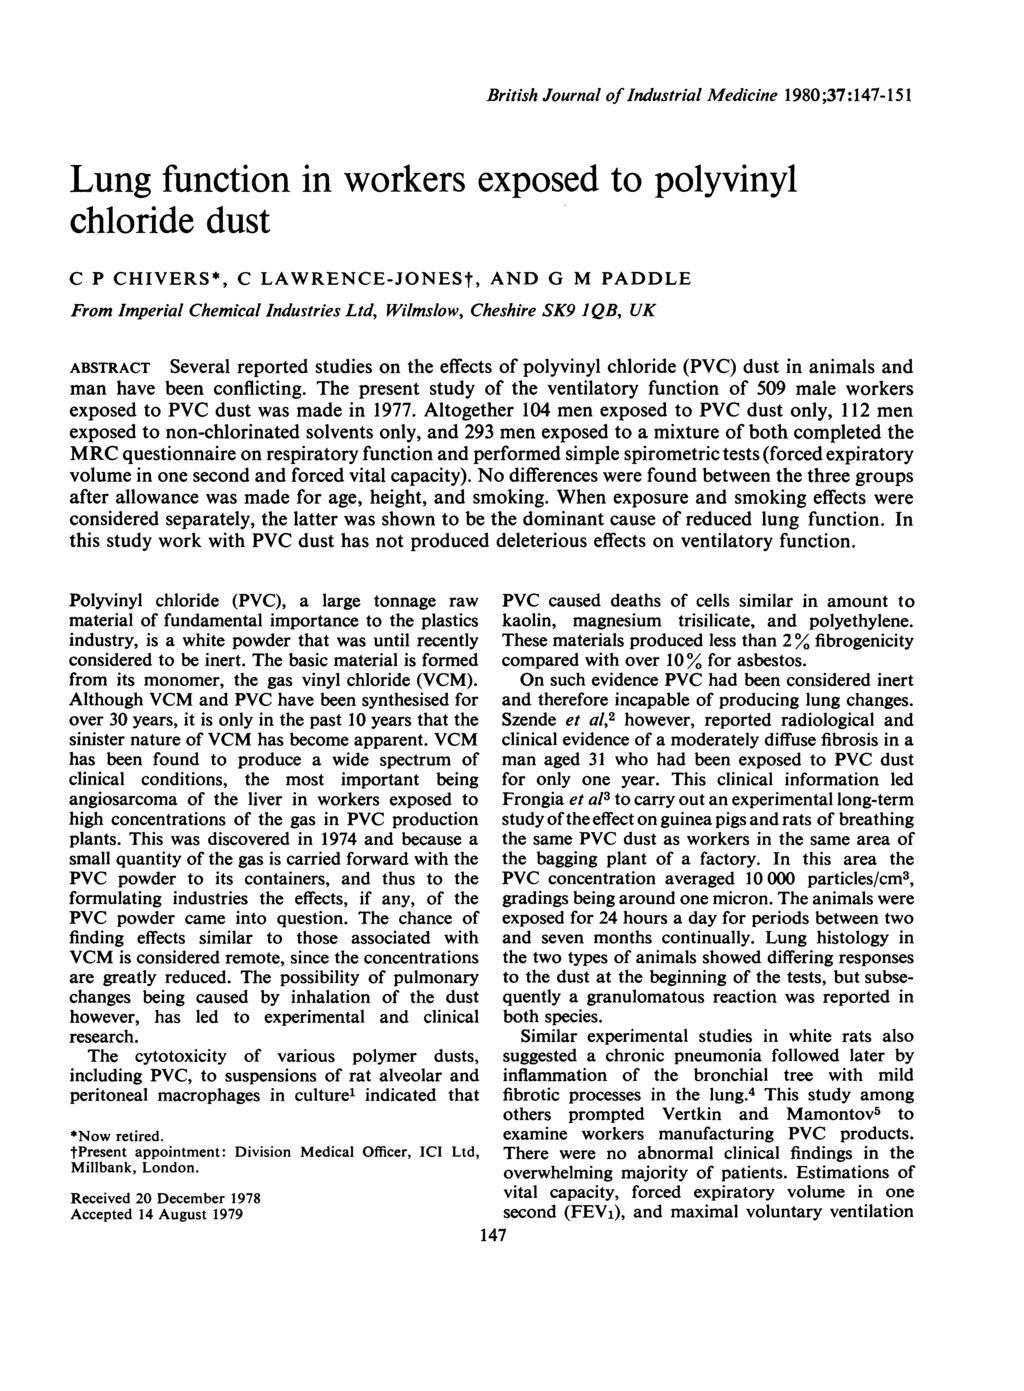 British Journal of Industrial Medicine 1980;37:147-151 Lung function in workers exposed to polyvinyl chloride dust C P CHIVERS*, C LAWRENCE-JONESt, AND G M PADDLE From Imperial Chemical Industries